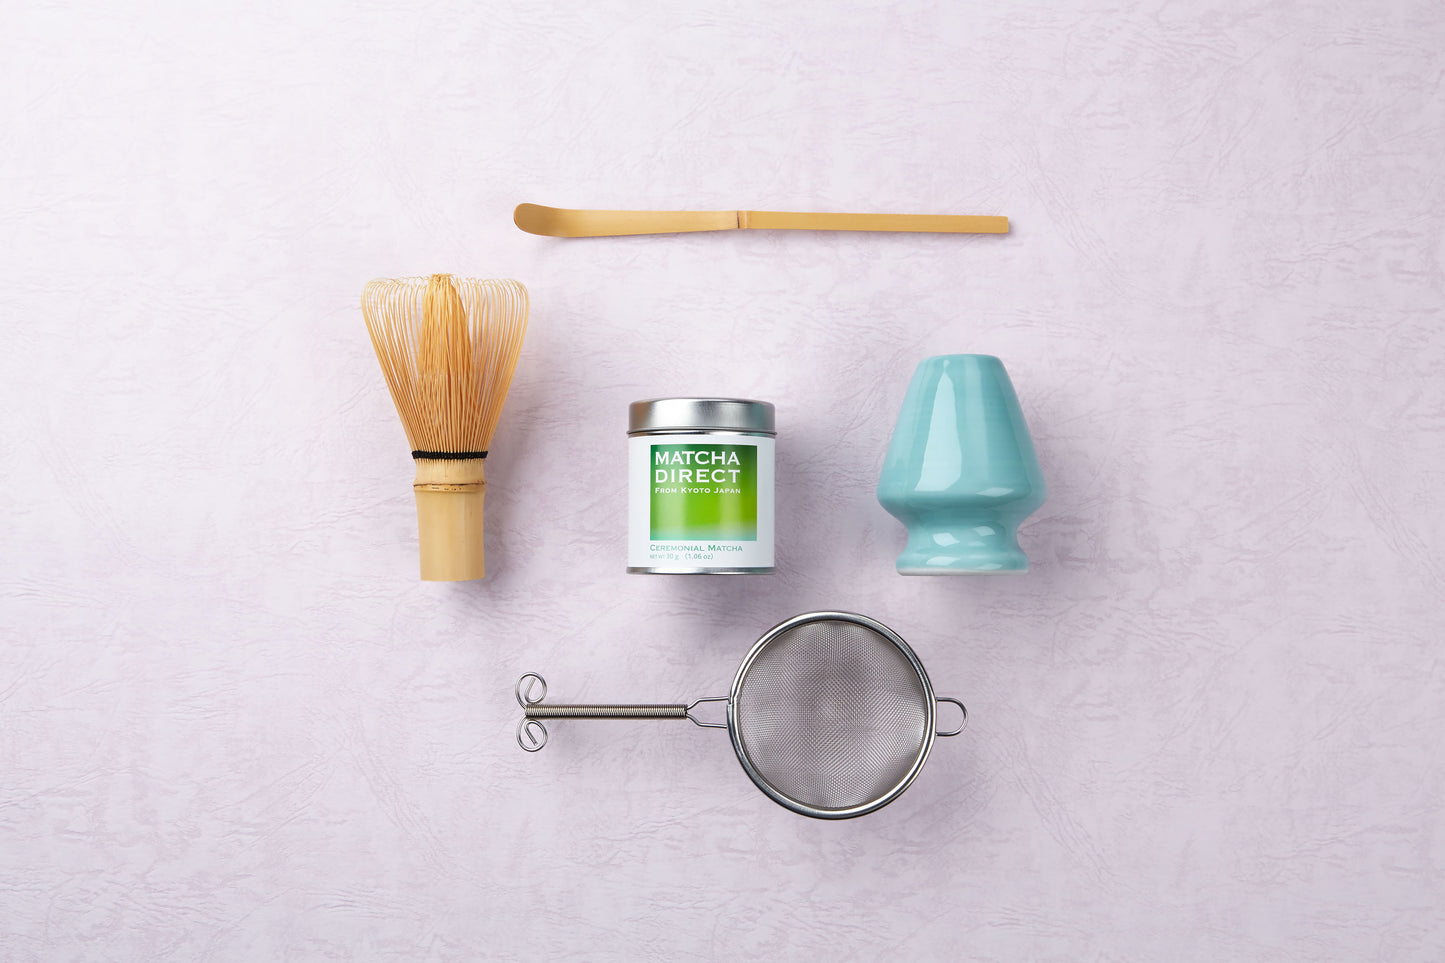 New on Matcha Direct: 'Matcha Starter Kit' - Entirely Made in Japan